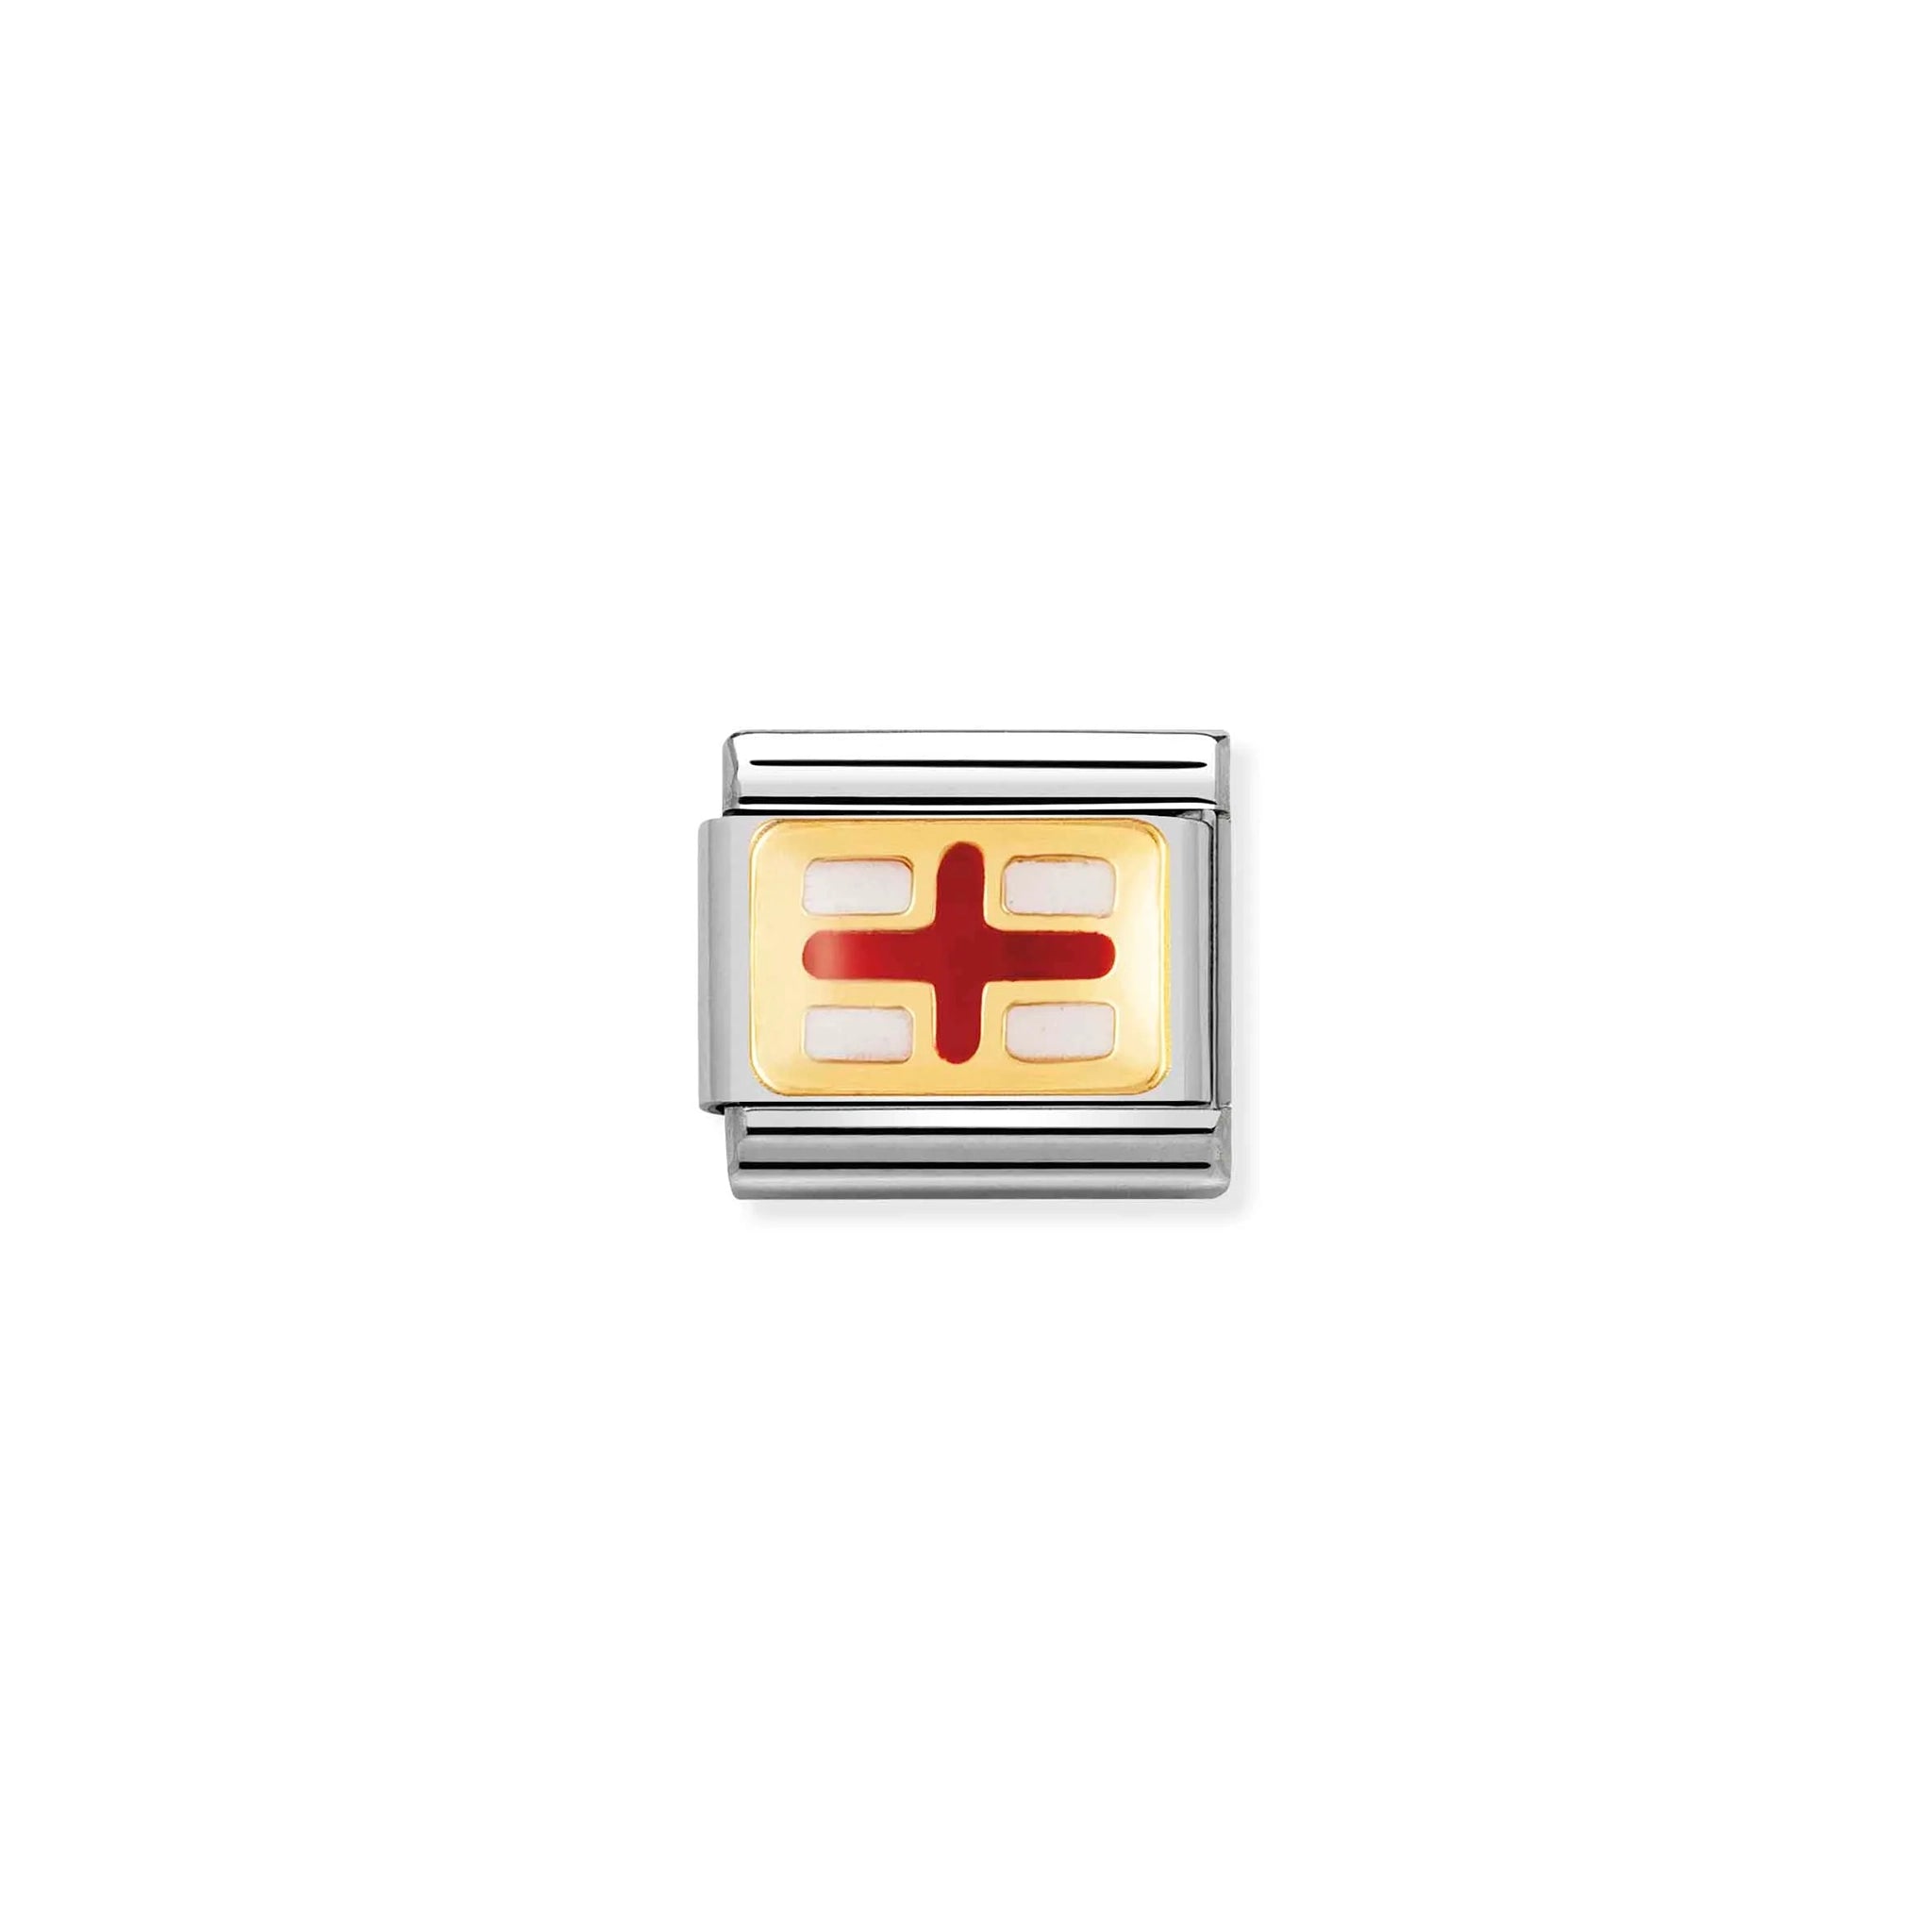 A Nomination charm link in gold featuring the England flag with  white and red enamel